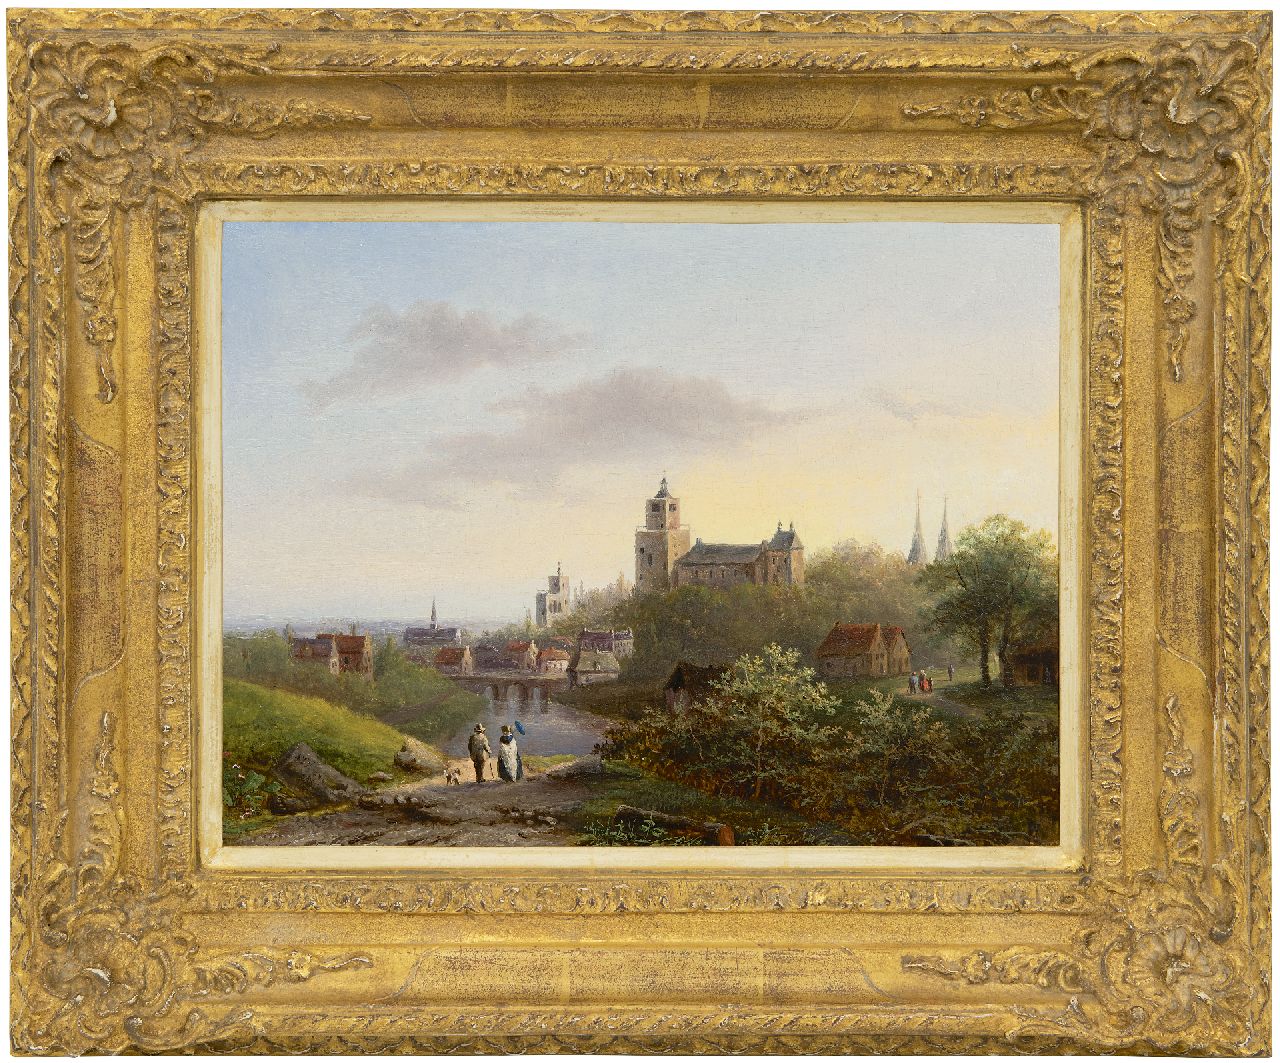 Hekking C.J.A.  | Carel Josephus Antonius Hekking | Paintings offered for sale | A view on Cleve with the Zwanenburcht and 'Belvédère' tower of B.C. Koekkoek, oil on panel 25.3 x 34.1 cm, signed l.l.